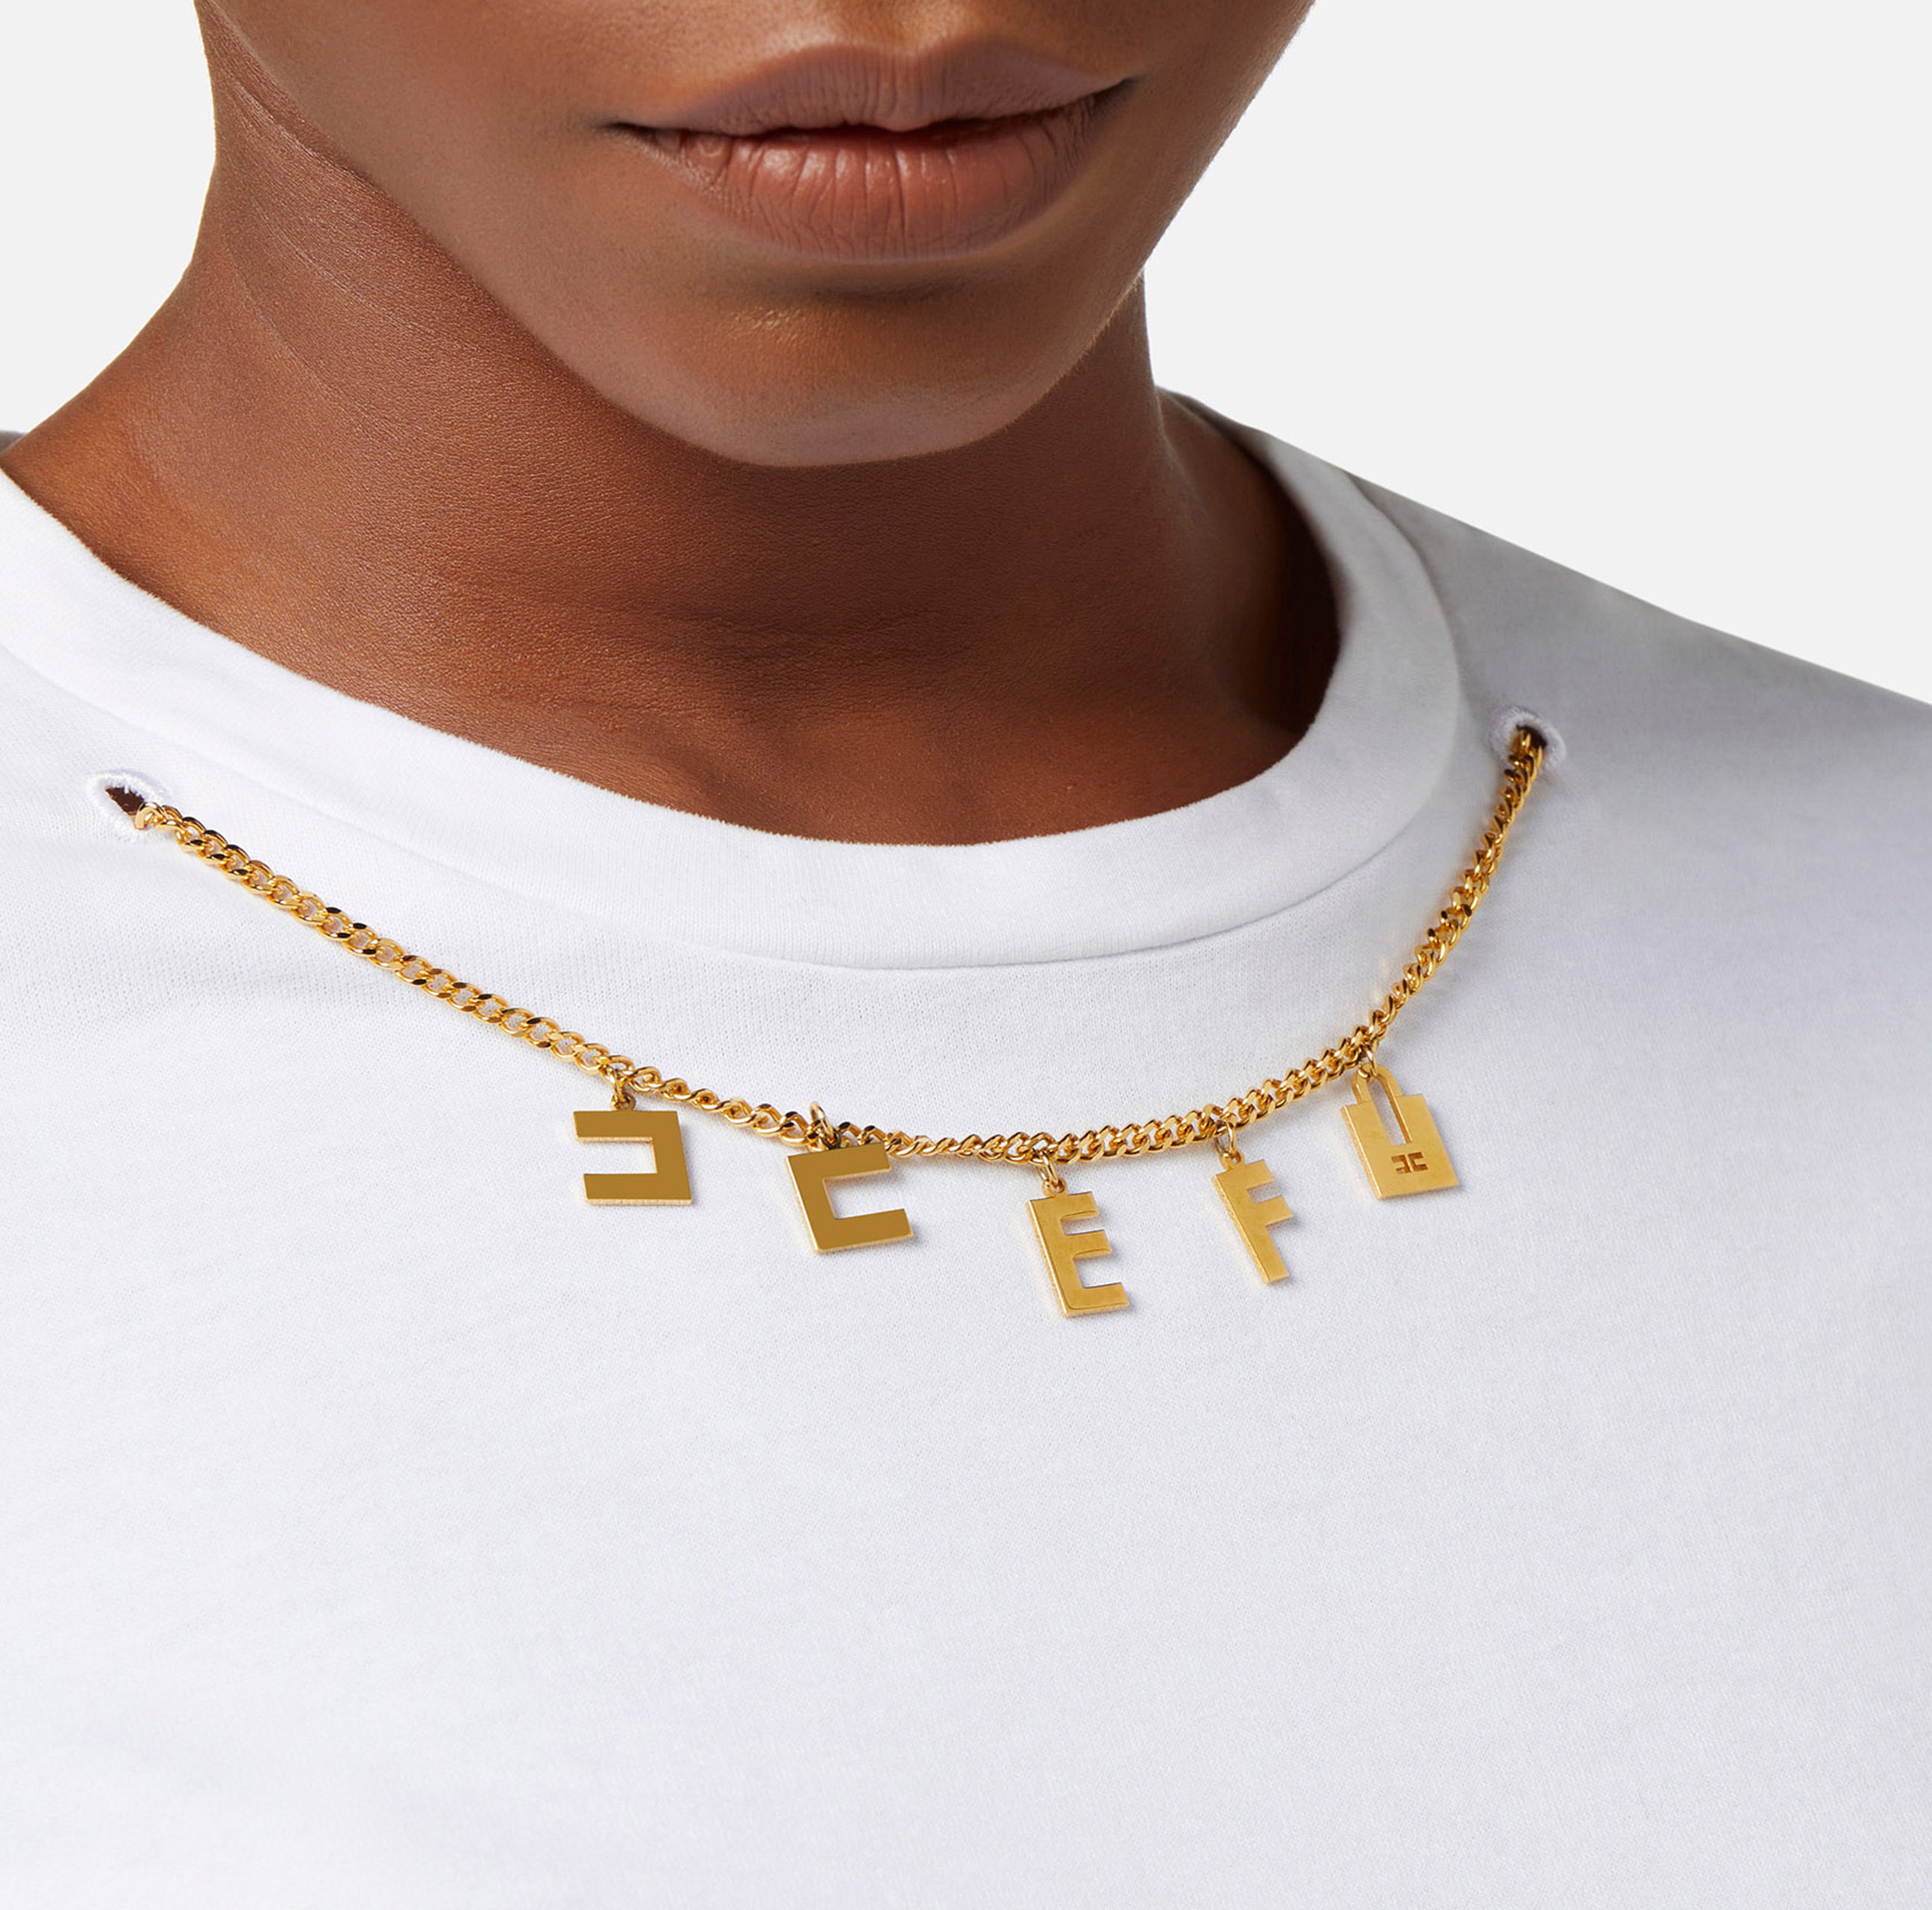 Jersey t-shirt with charm accessory - Elisabetta Franchi